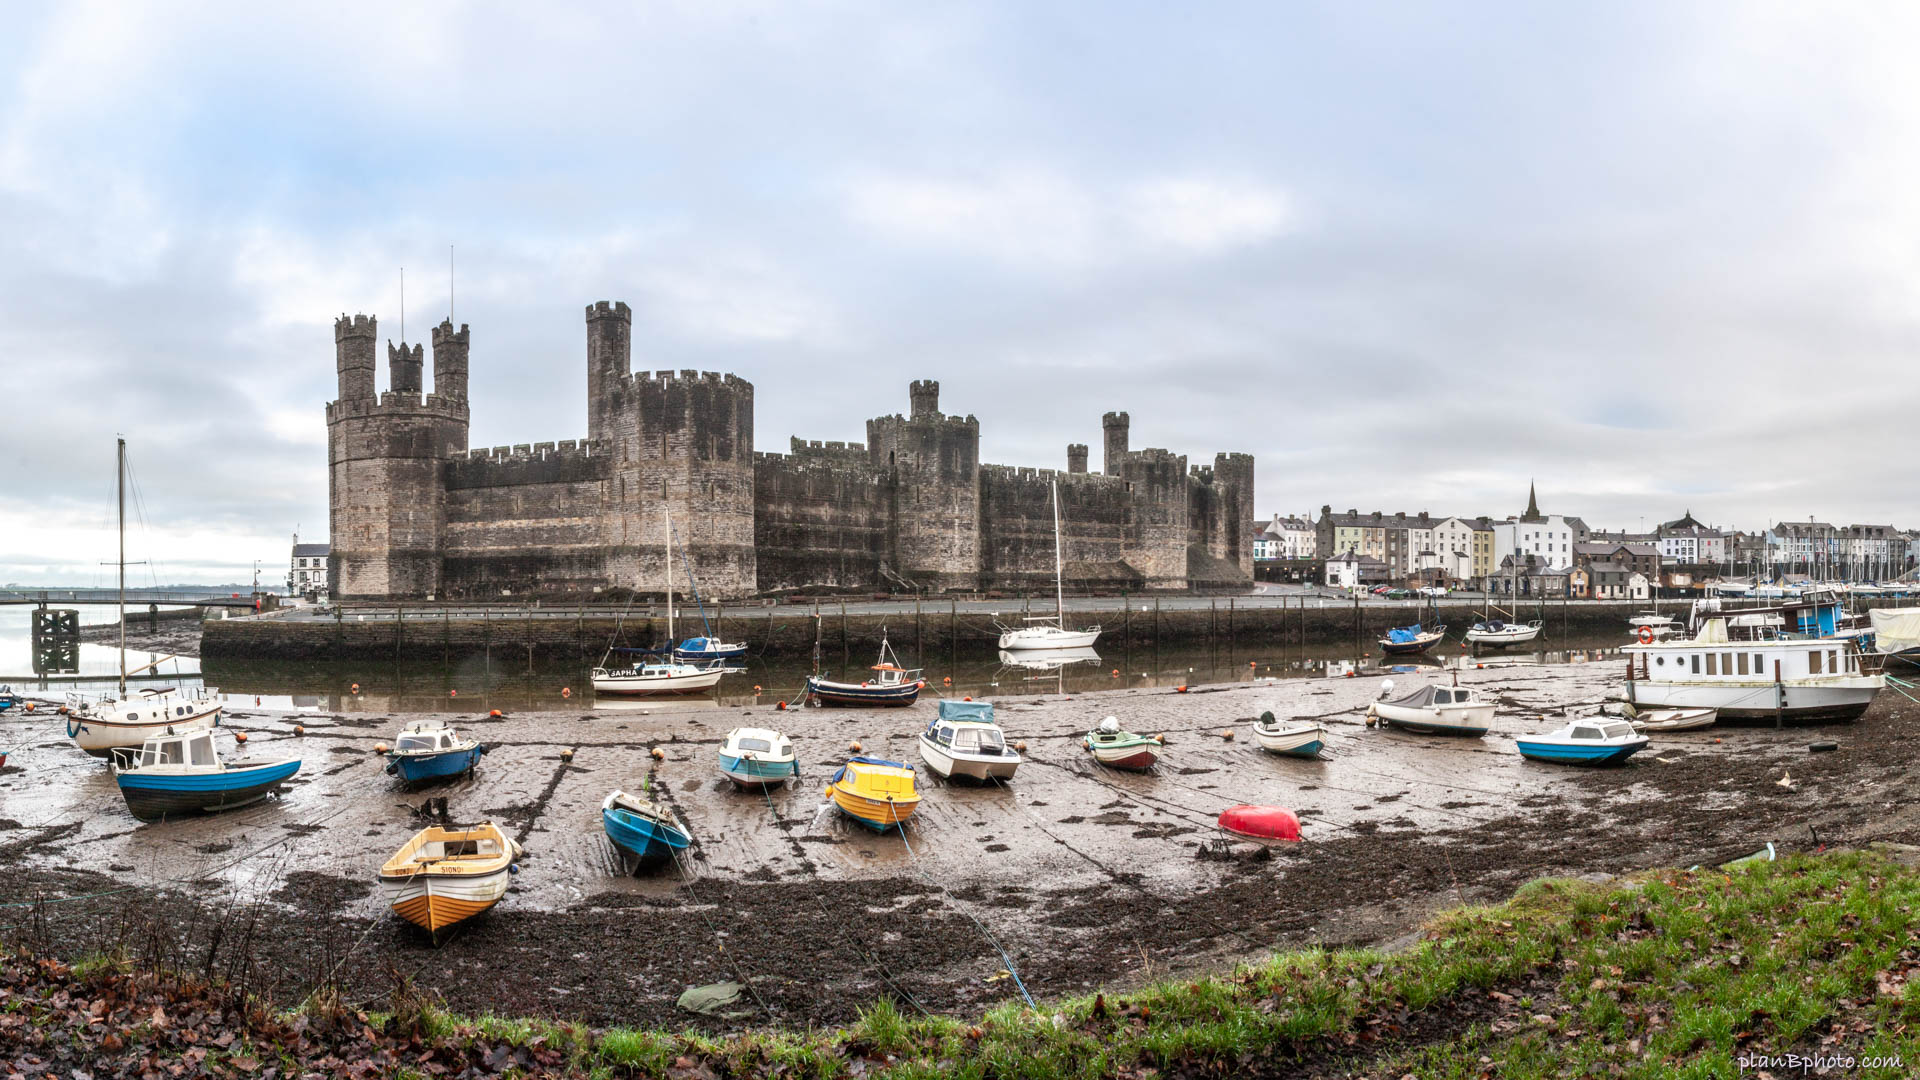 Caernarfon castle in the morning with boats in low tide